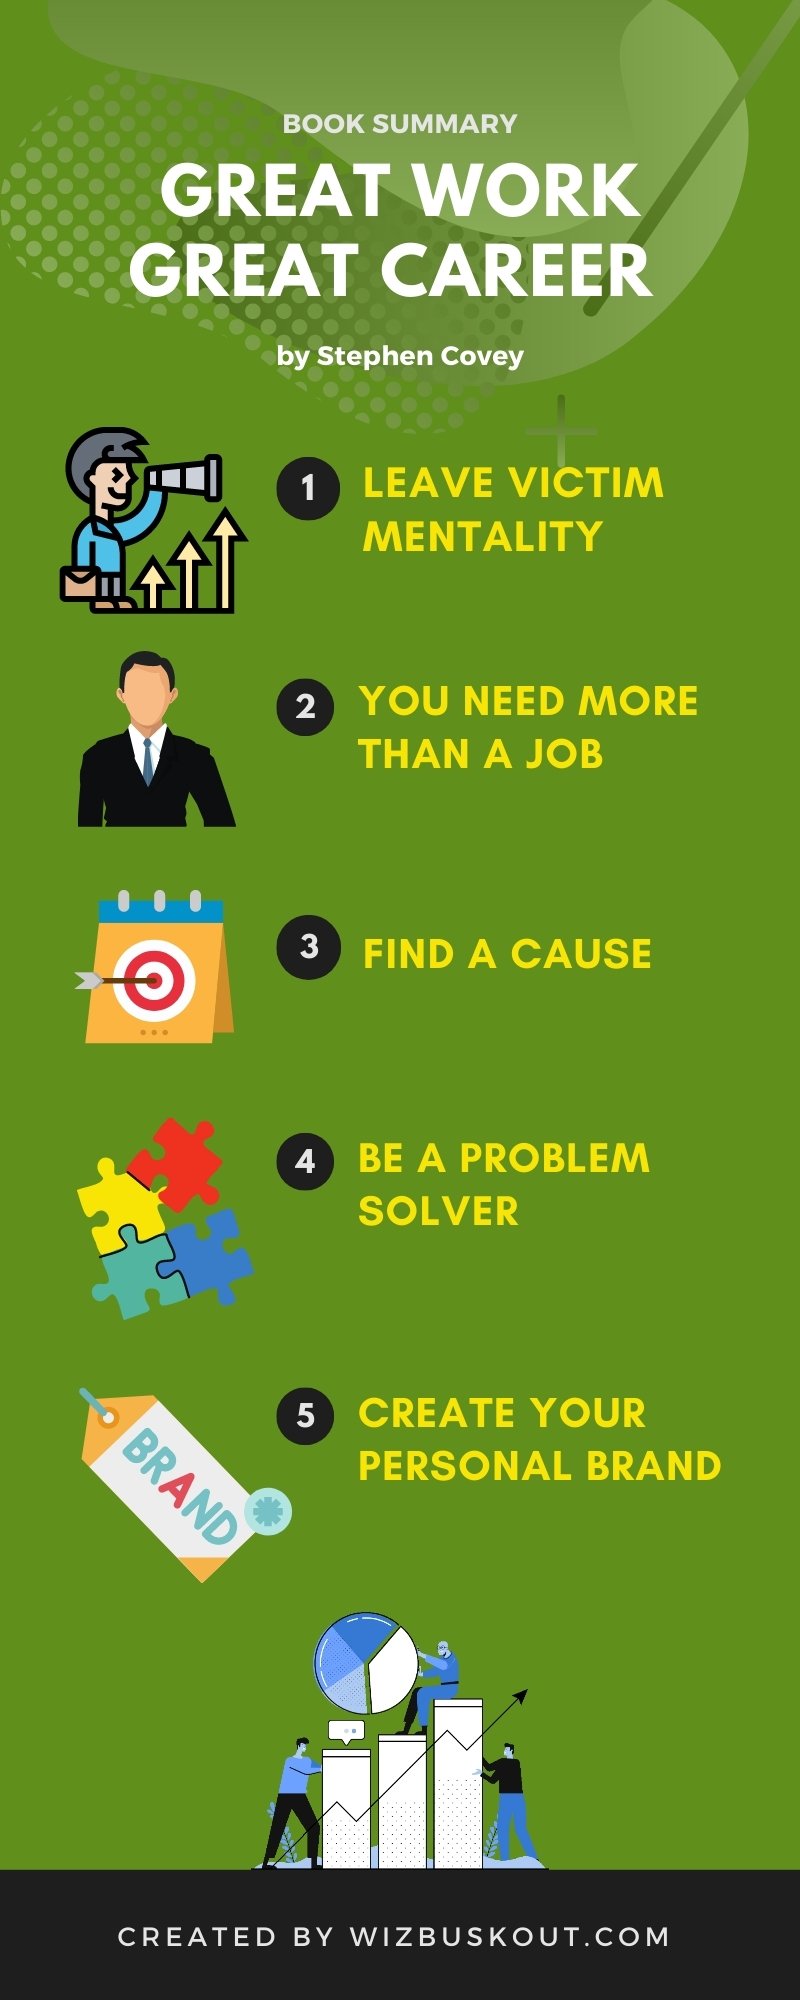 Great Work Great Career Summary Infographic